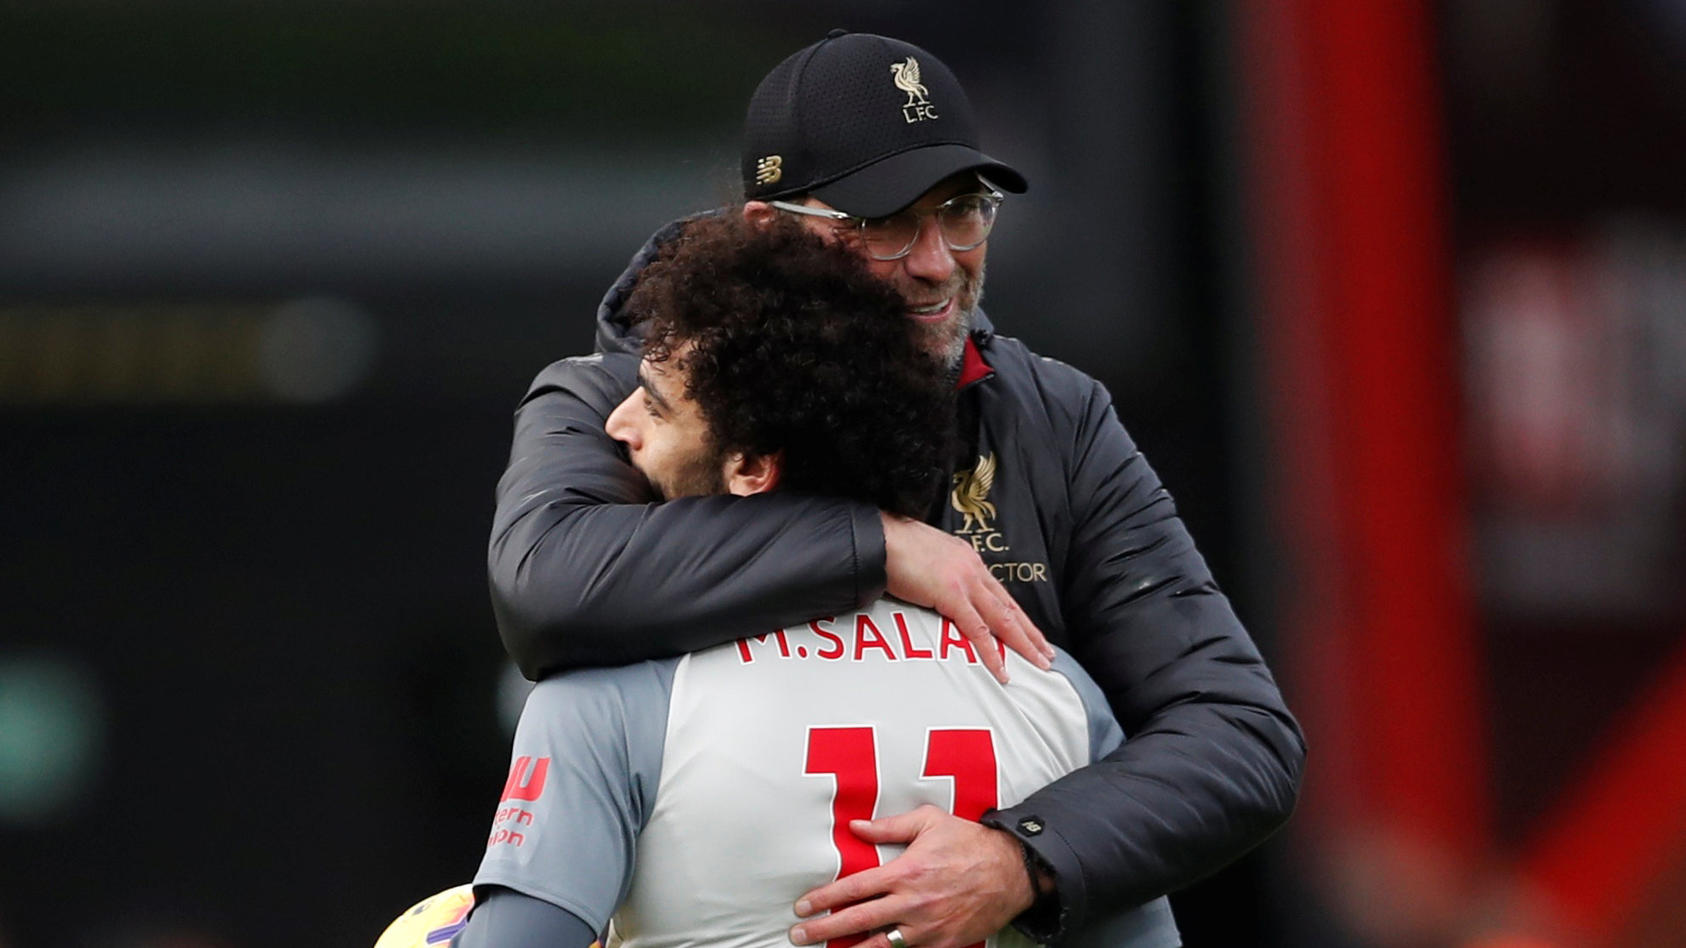 Soccer Football - Premier League - AFC Bournemouth v Liverpool - Vitality Stadium, Bournemouth, Britain - December 8, 2018  Liverpool manager Juergen Klopp celebrates after the match with Mohamed Salah   Action Images via Reuters/Matthew Childs  EDIT